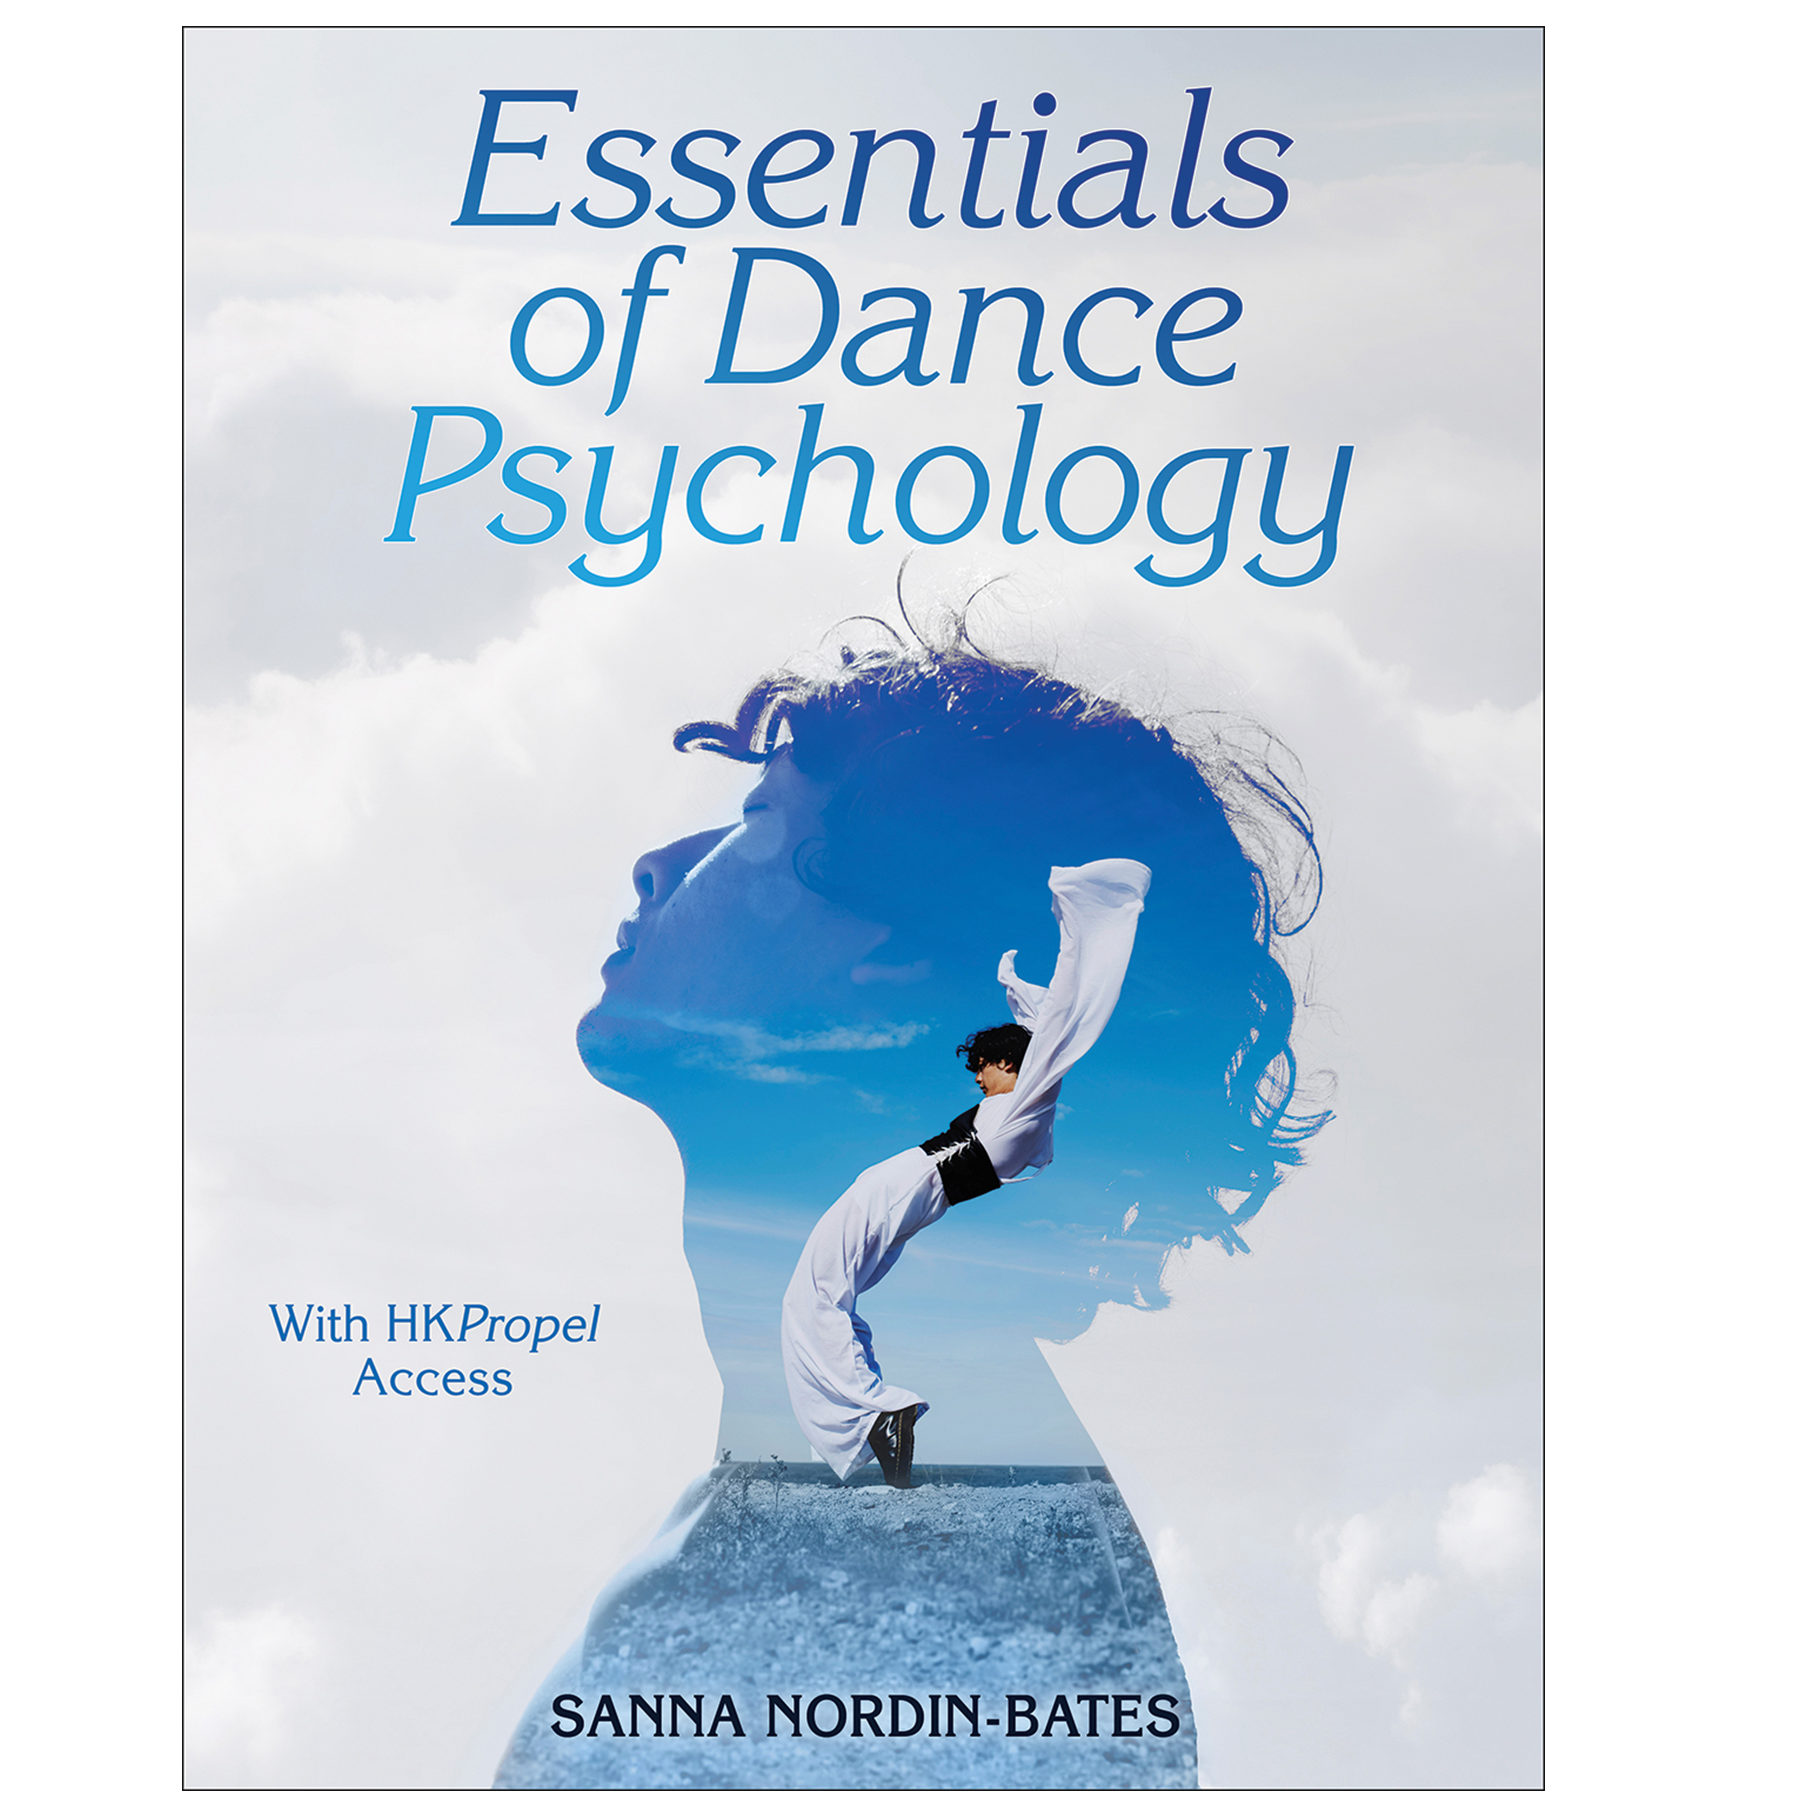 A textbook cover. The outline of a boy's head looking up acts as a frame for a photograph of a young man hinging back in front of a blue sky, whipping his open button-down shirt up behind him for dramatic effect. Text reads "Essentials of Dance Psychology."